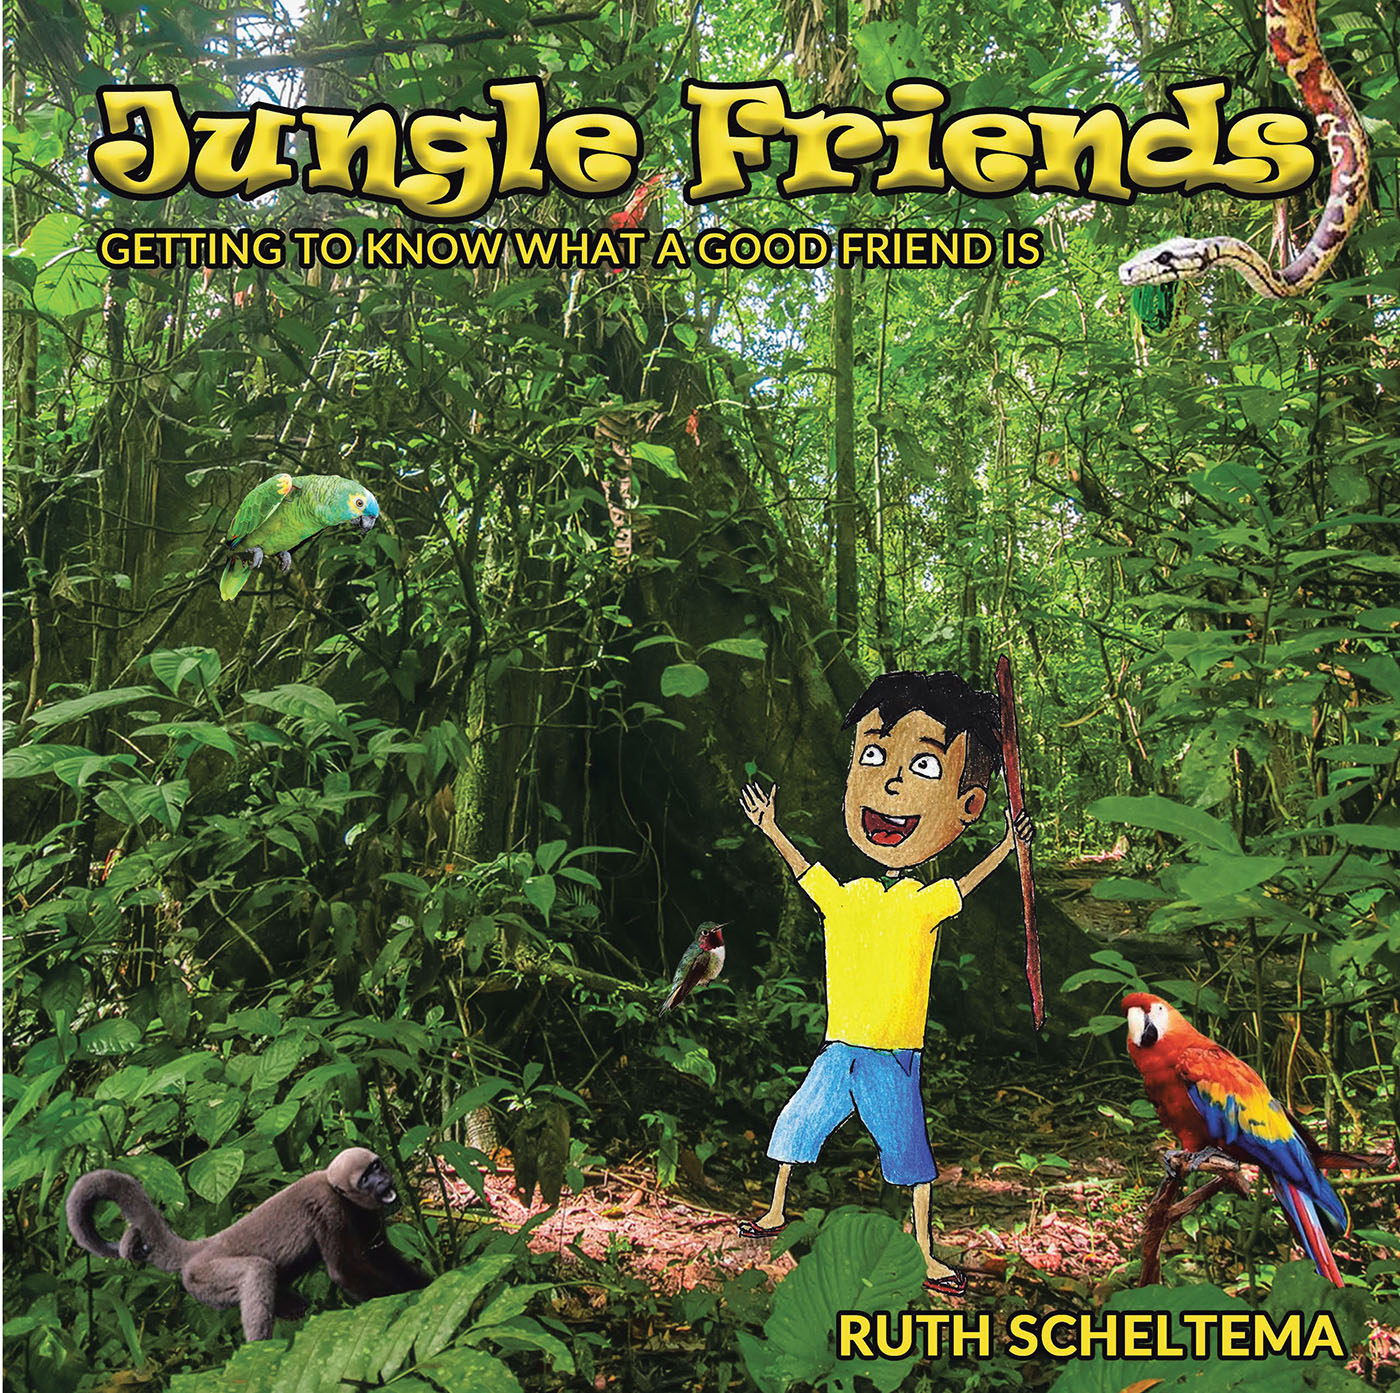 Ruth Scheltema’s Newly Released "Jungle Friends: Getting to Know What a Good Friend Is" is a Creative Learning Opportunity That Examines Quality Personal Traits